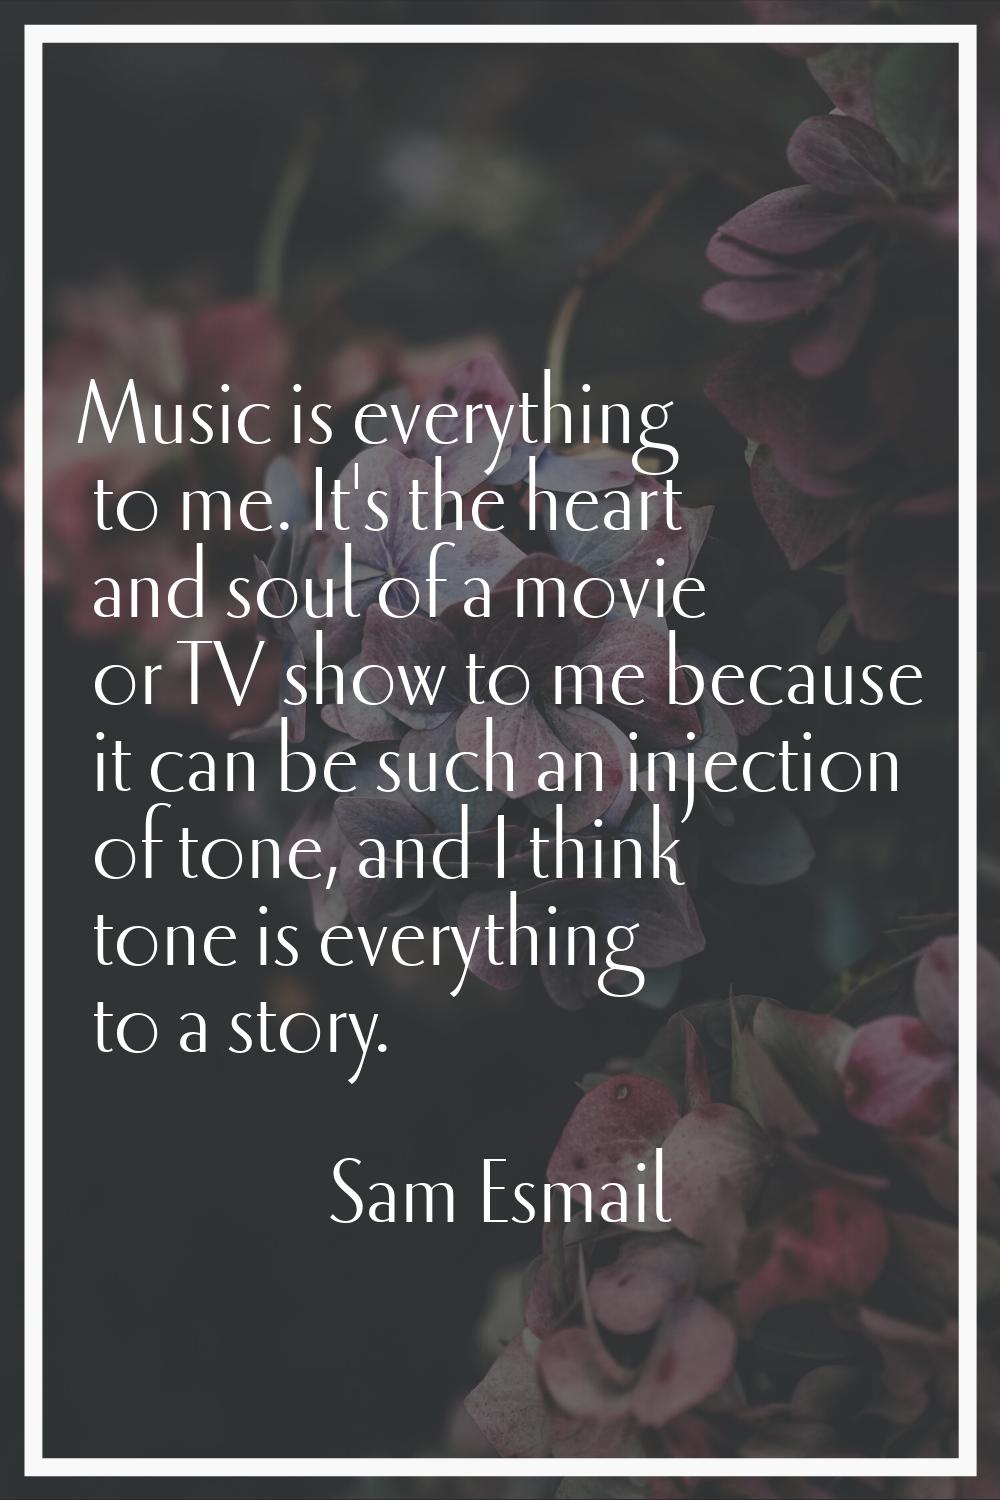 Music is everything to me. It's the heart and soul of a movie or TV show to me because it can be su